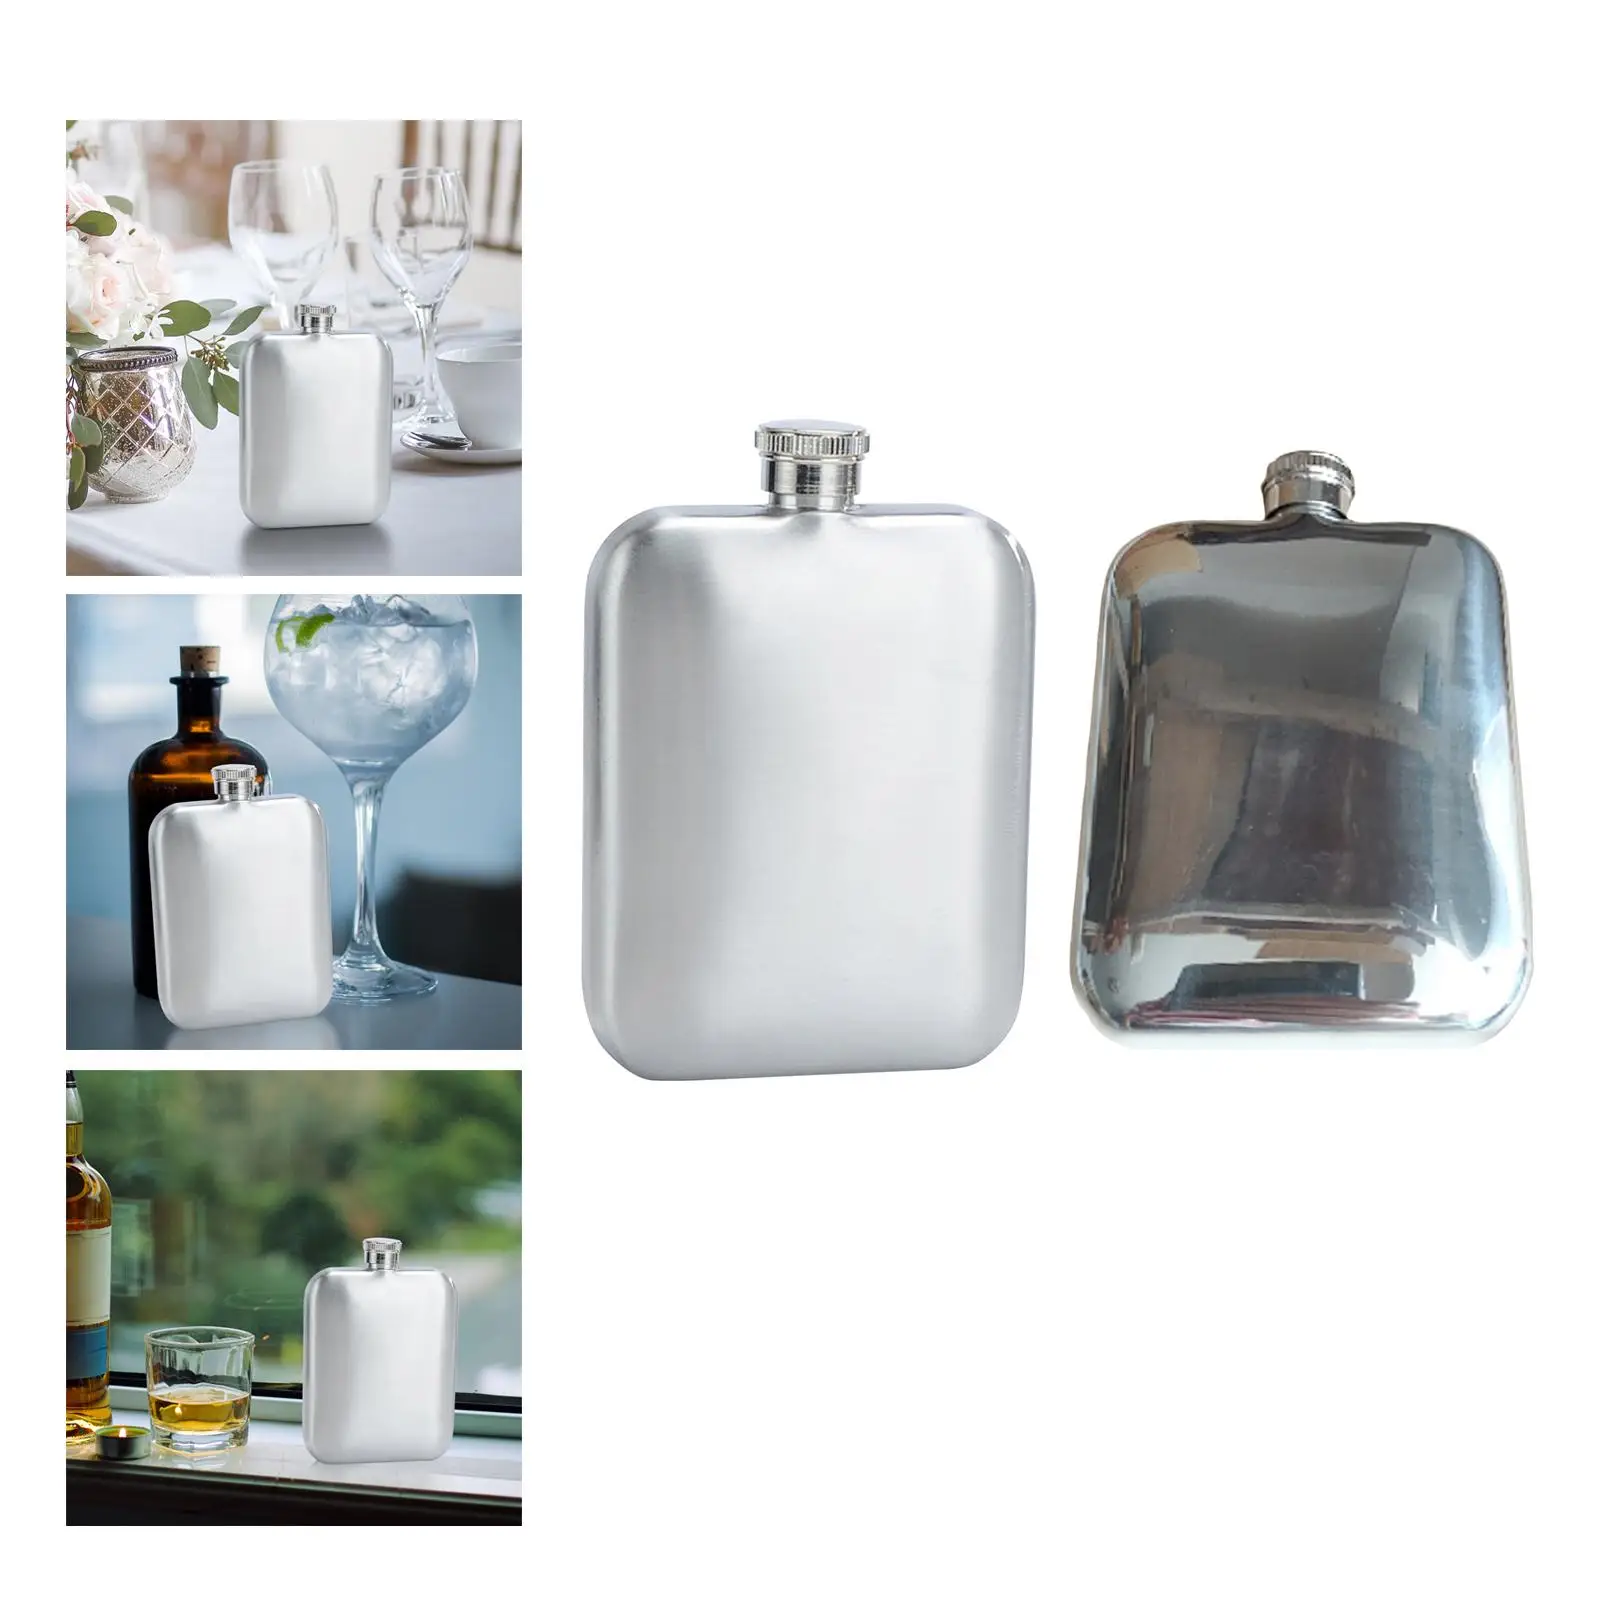 Stainless Steel Hip Flask Pot Wine Bottle Portable Drinkware for Camping Backpacking